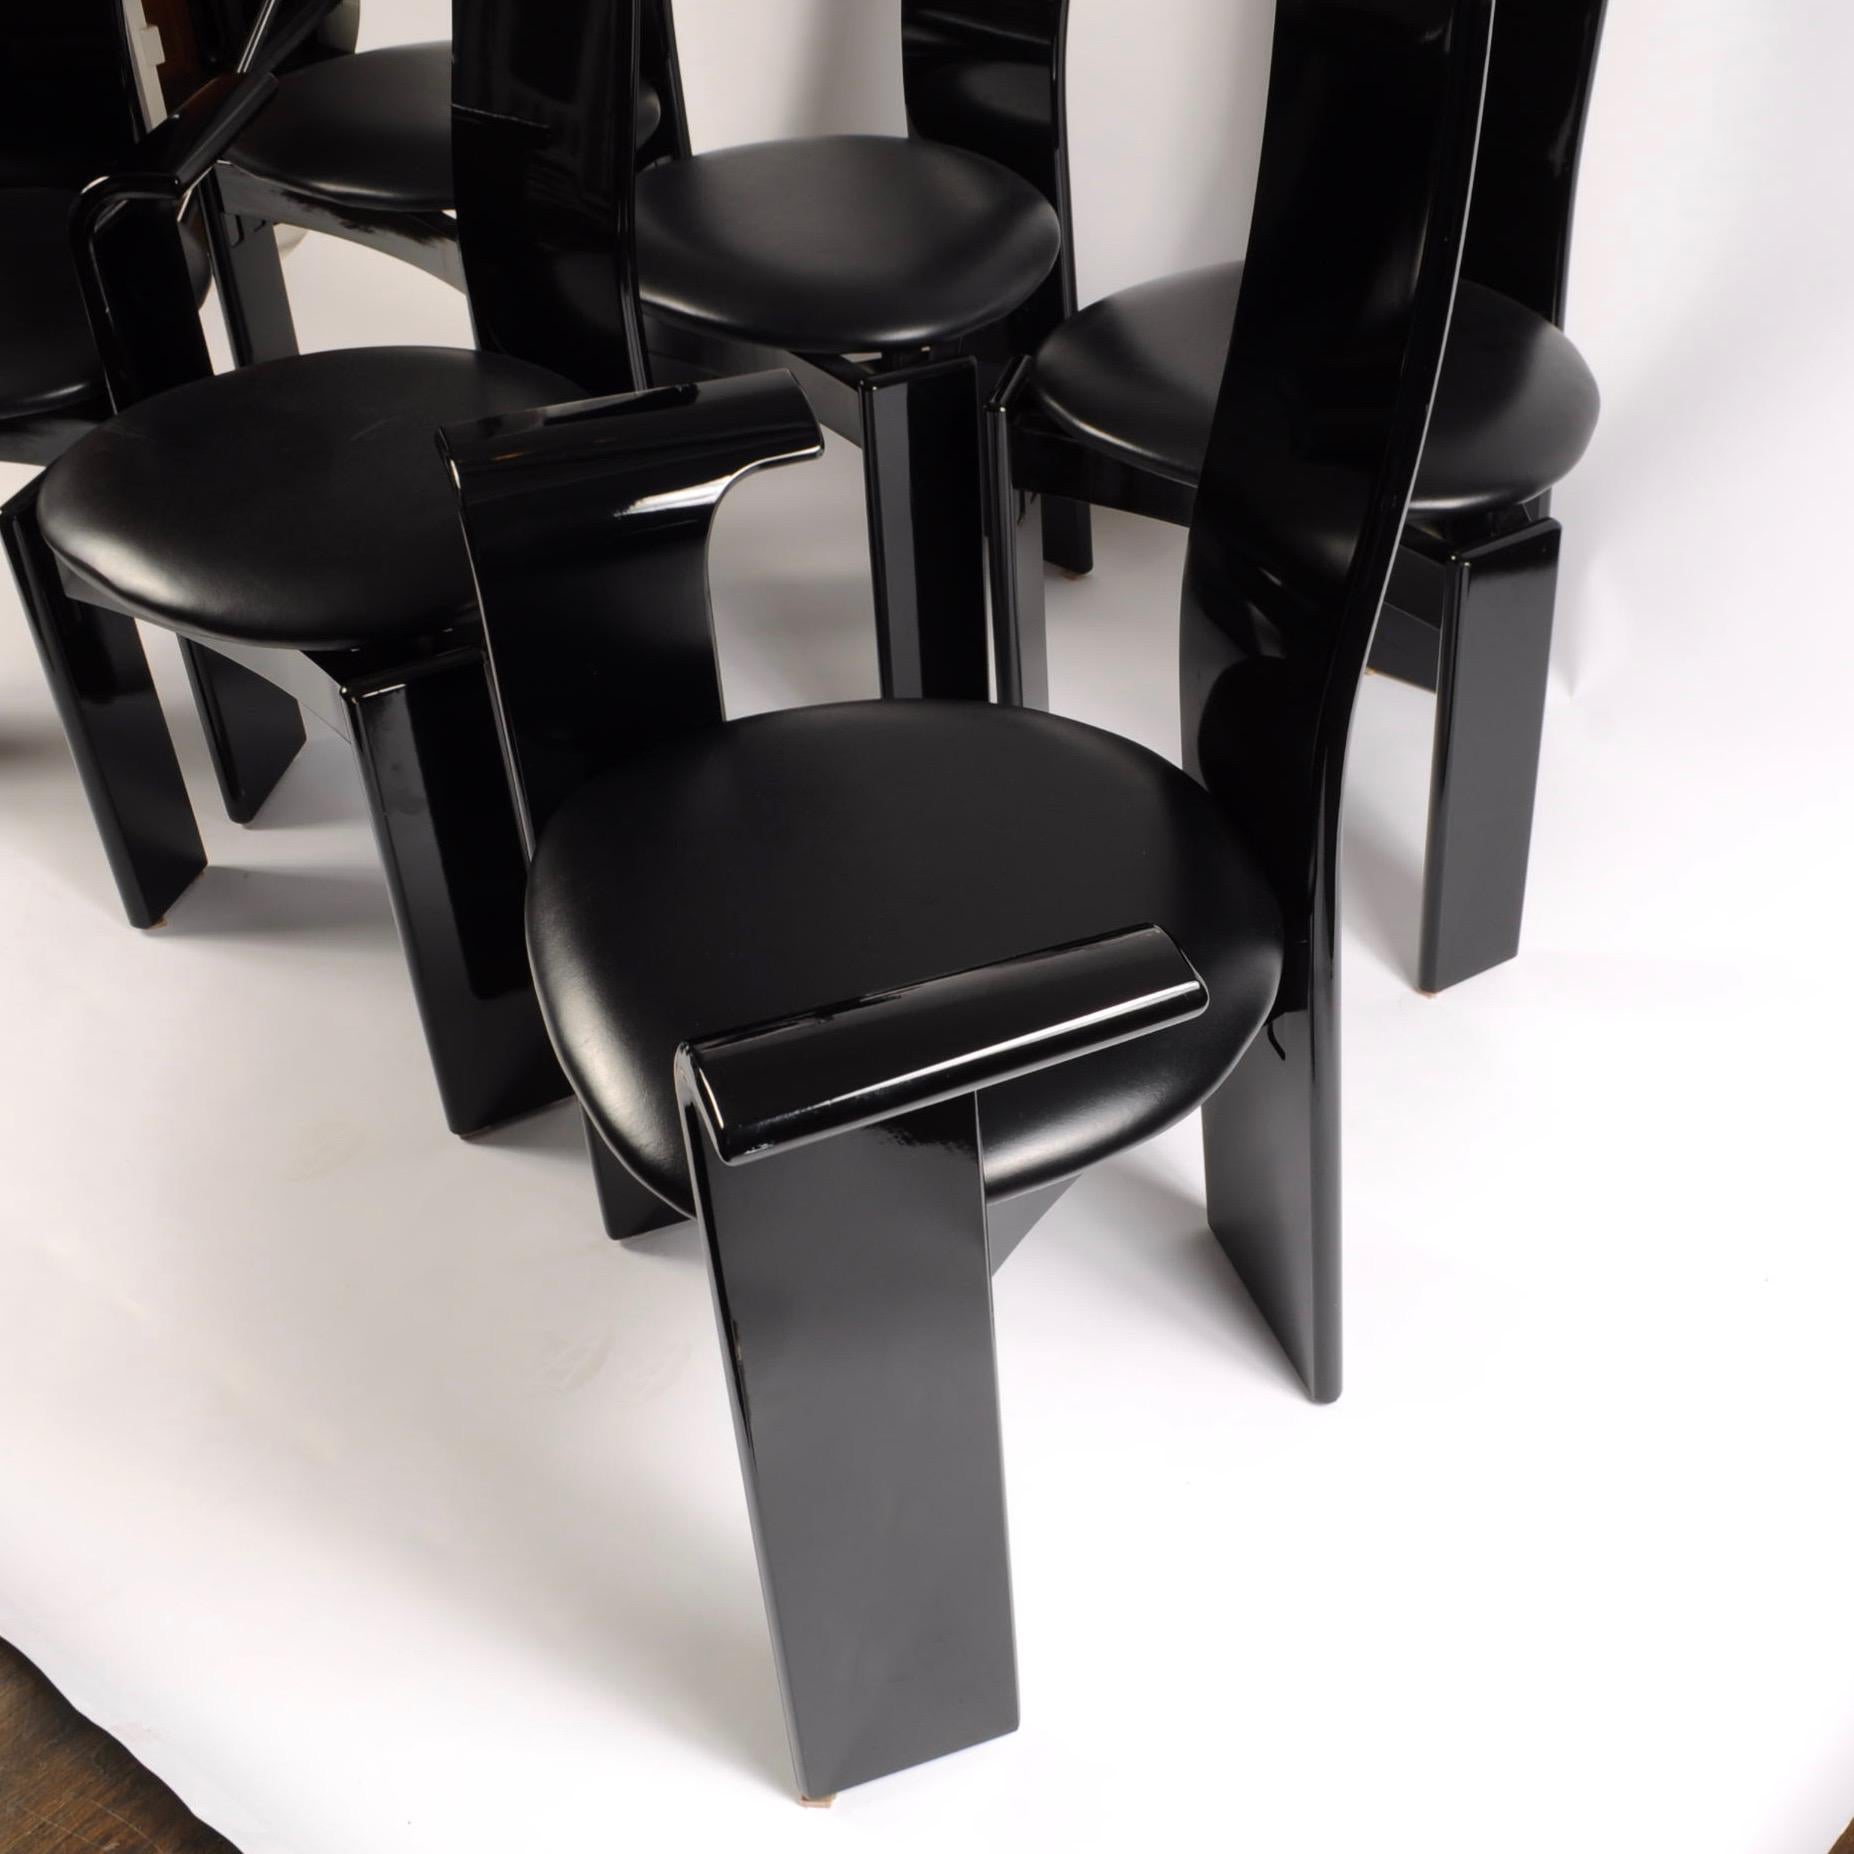 Set of 6 clean Italian black lacquer chairs with high backs, rounded waterfall arms and black leather seat cushions. Purchased through Roche Bobois in the 1970s. Each back has a Memphis style graphic airbrushed over the lacquer and sealed with a